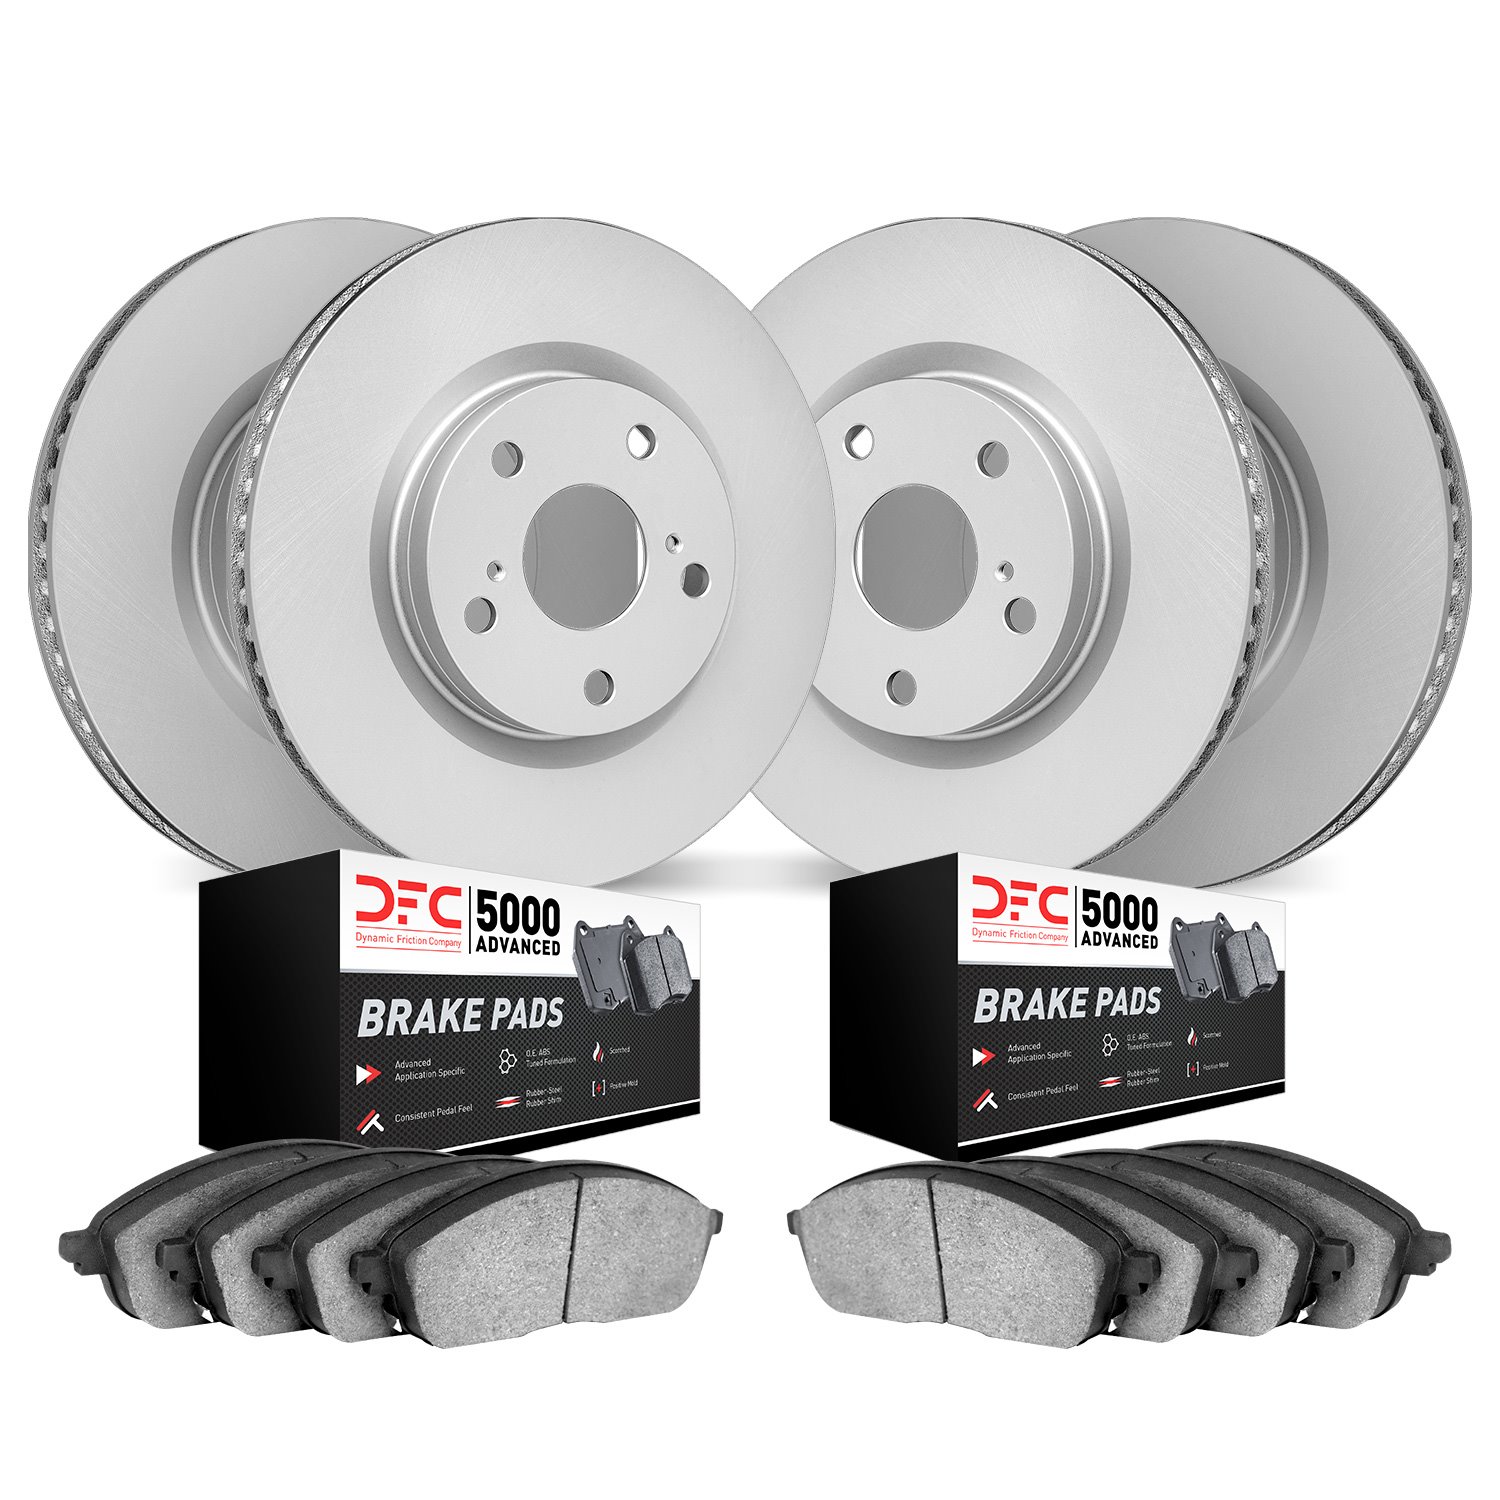 4504-63091 Geospec Brake Rotors w/5000 Advanced Brake Pads Kit, 2017-2017 Mercedes-Benz, Position: Front and Rear